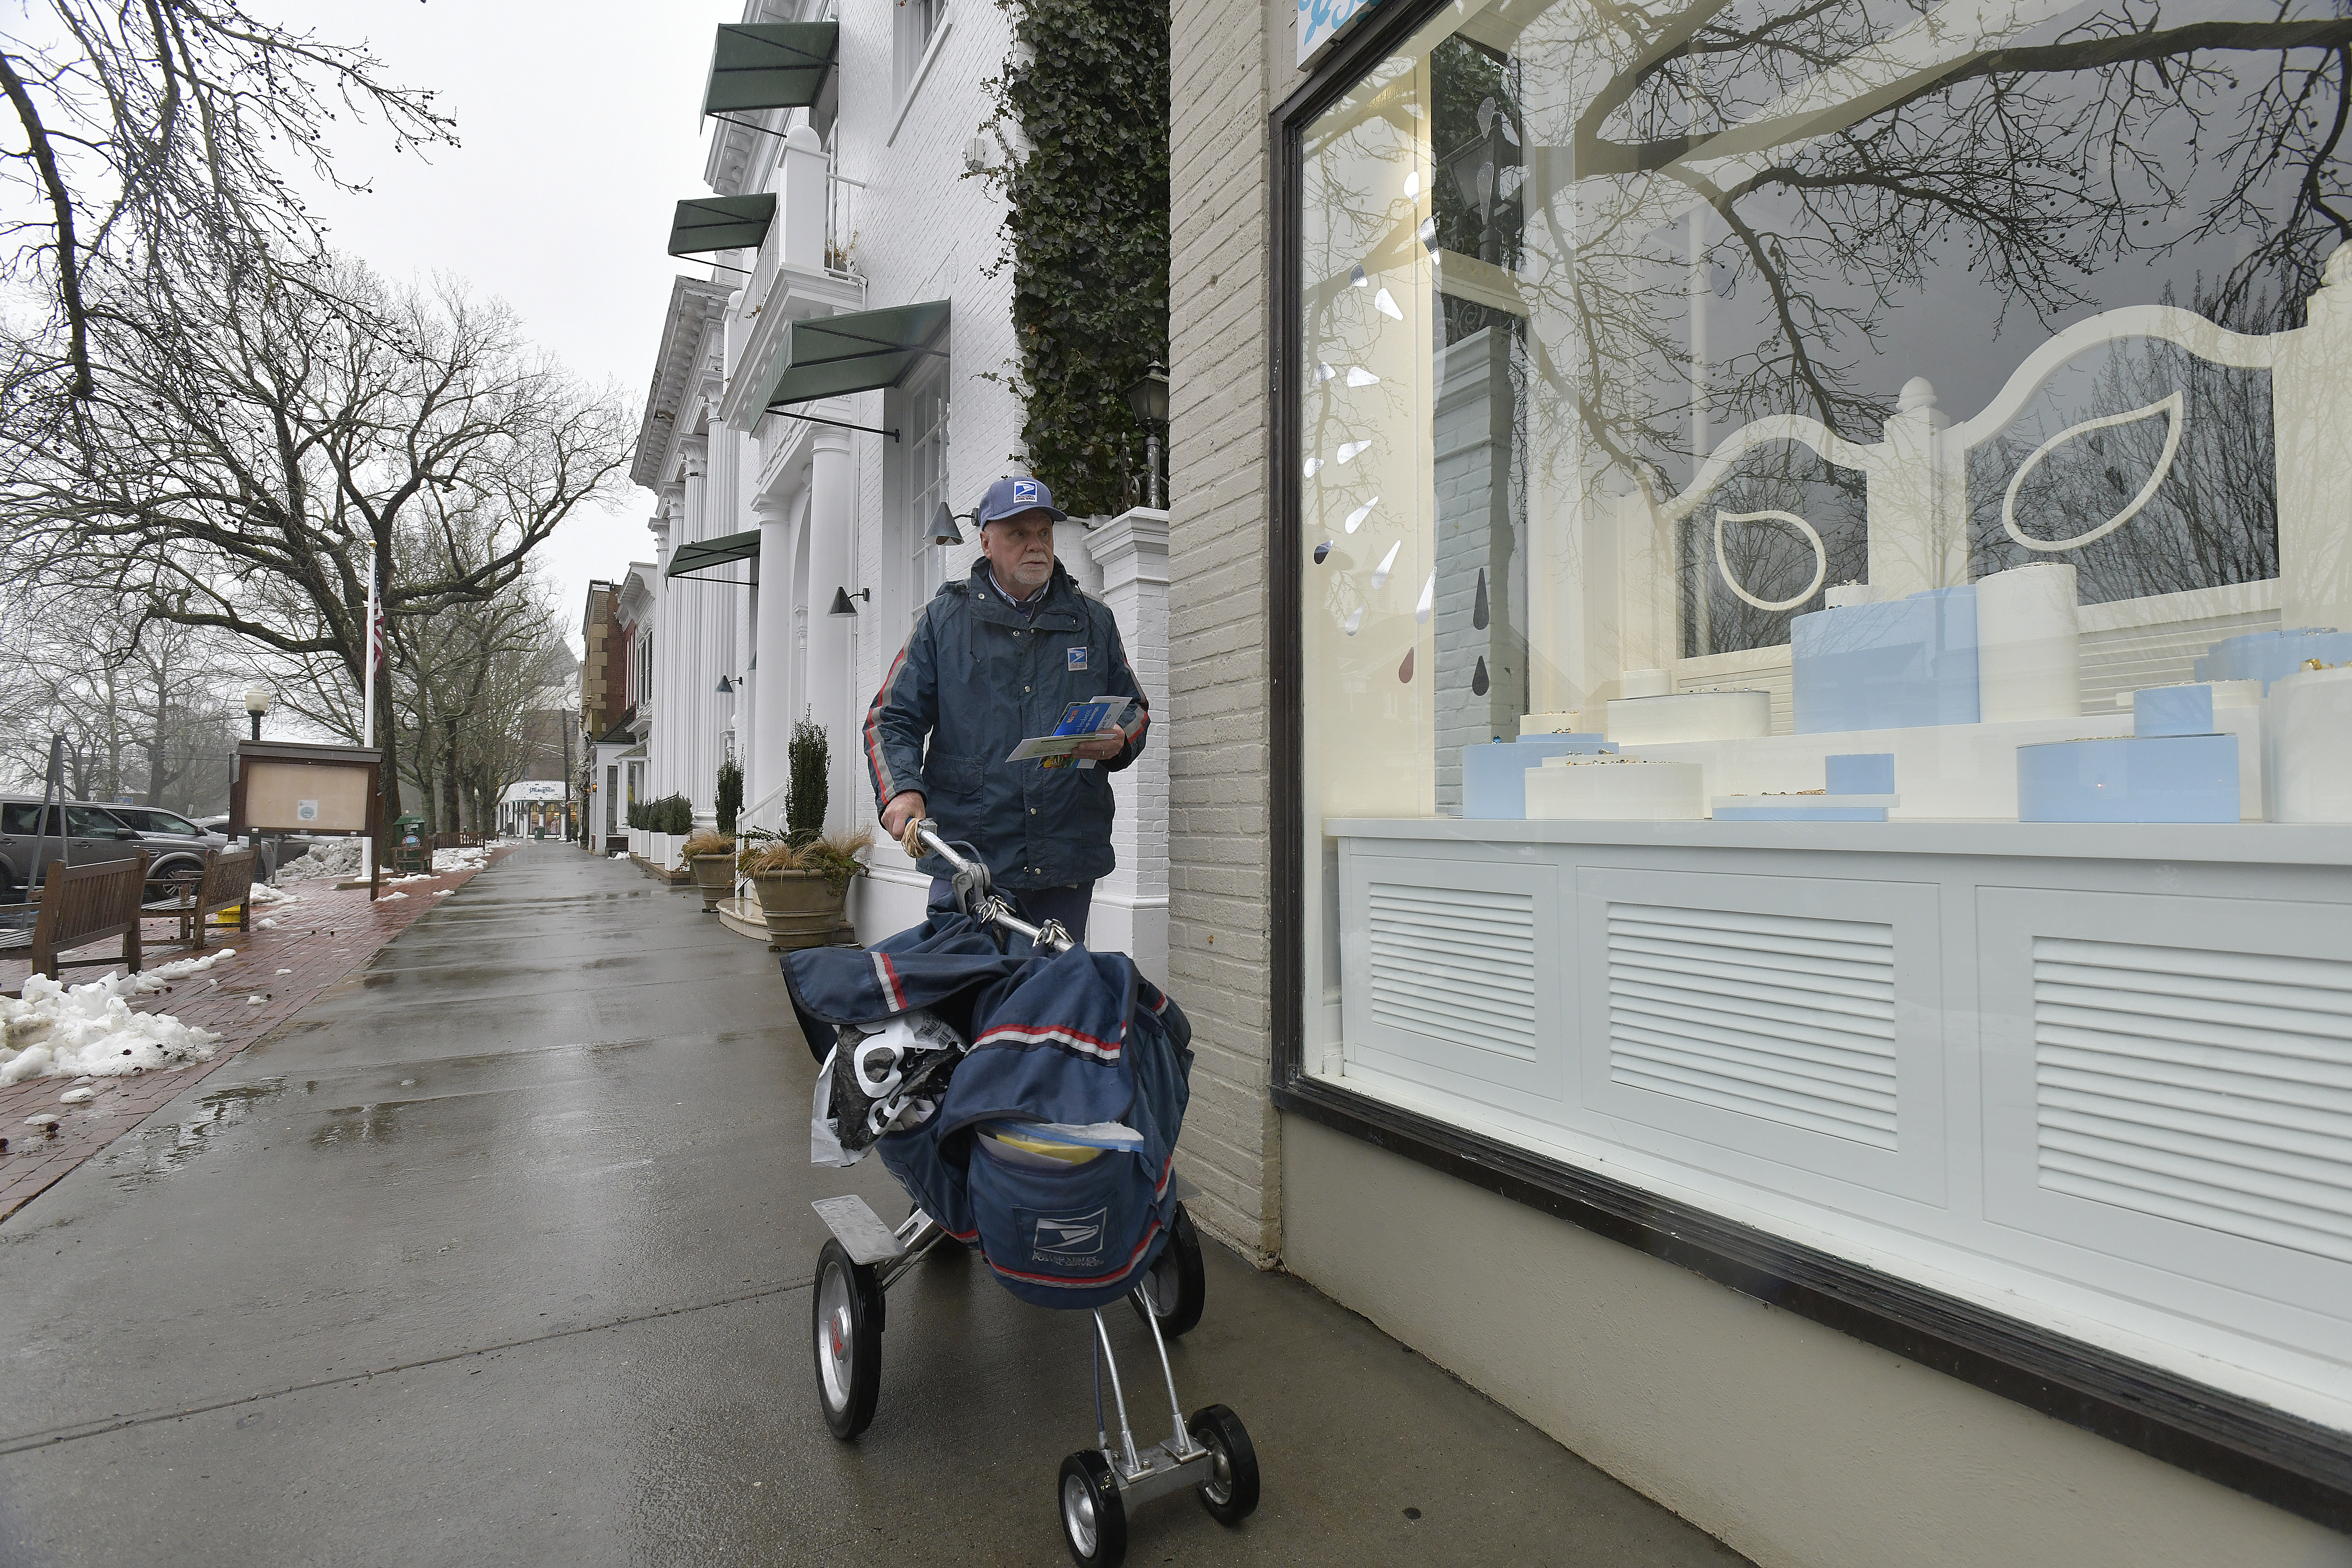 Jim Tuthill on his route in Southampton Village on his last day, February 28.  DANA SHAW